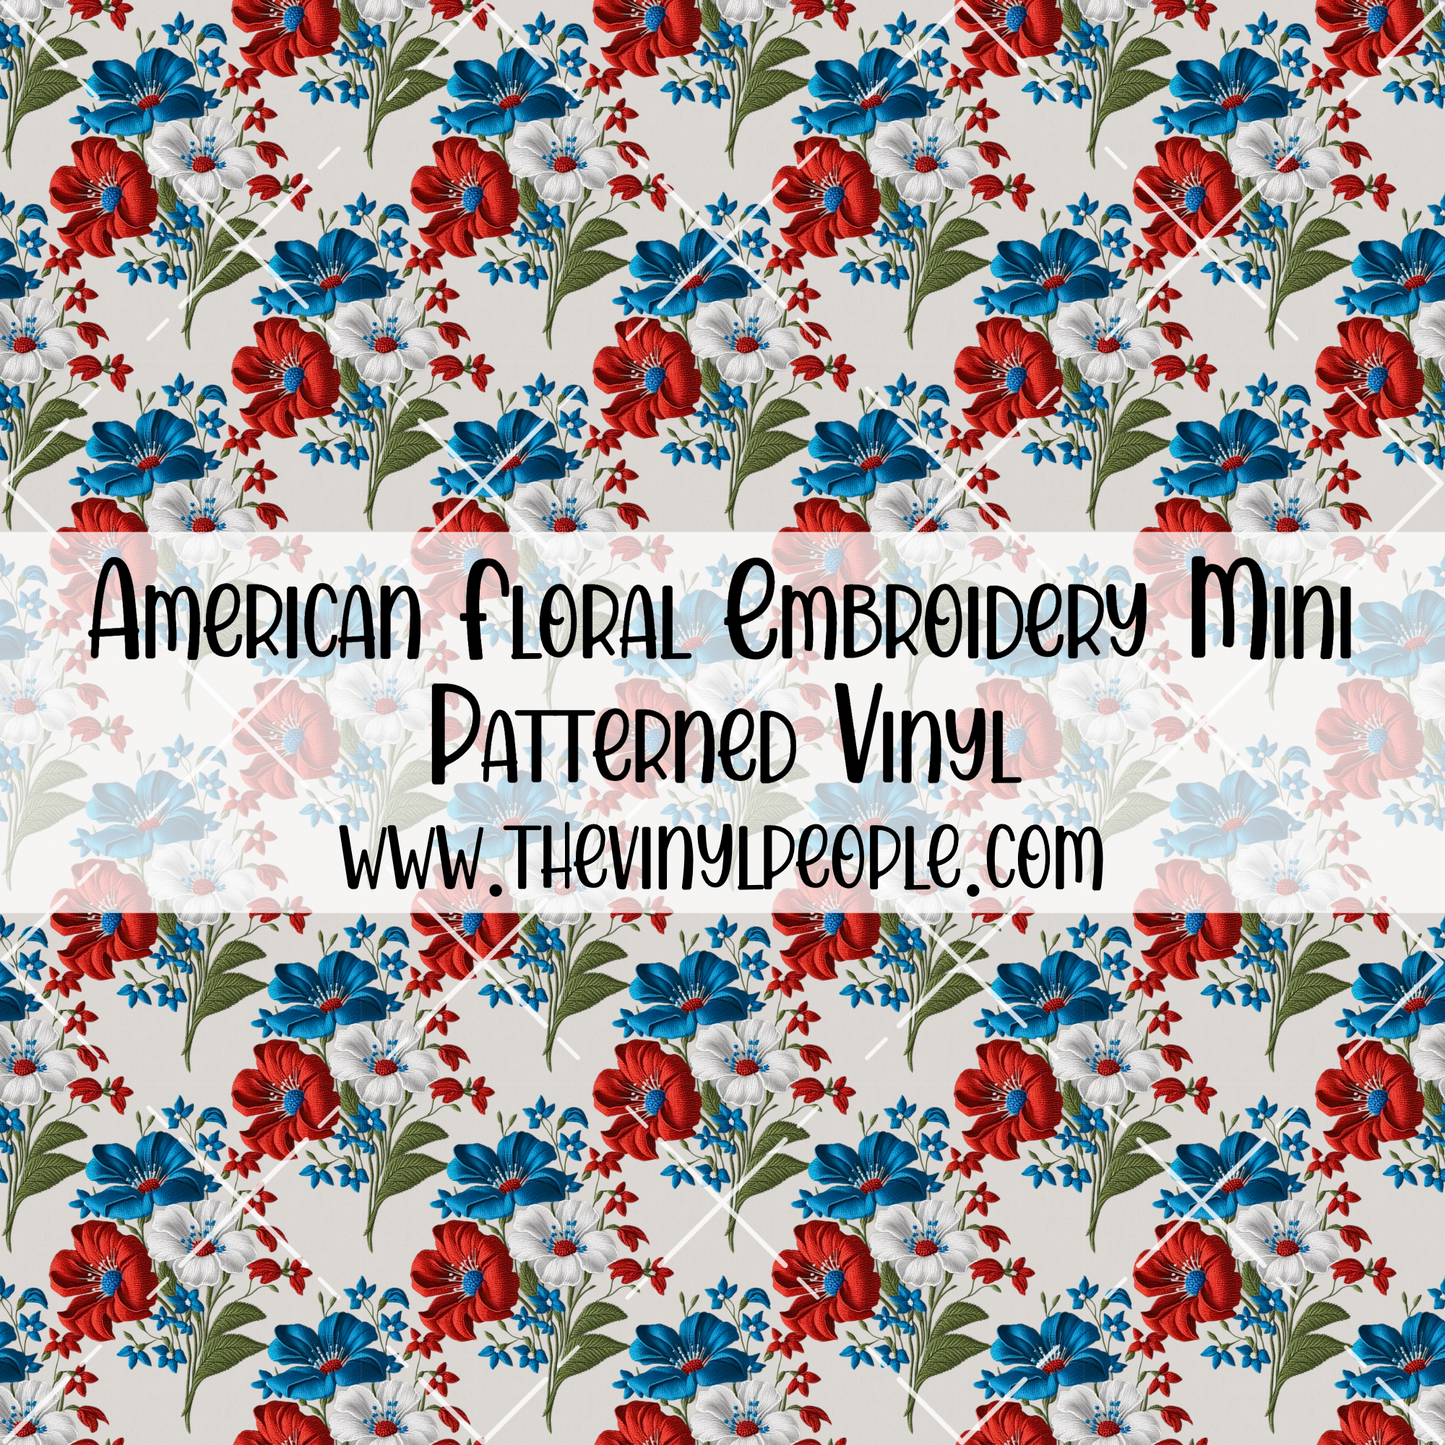 American Floral Embroidery Patterned Vinyl